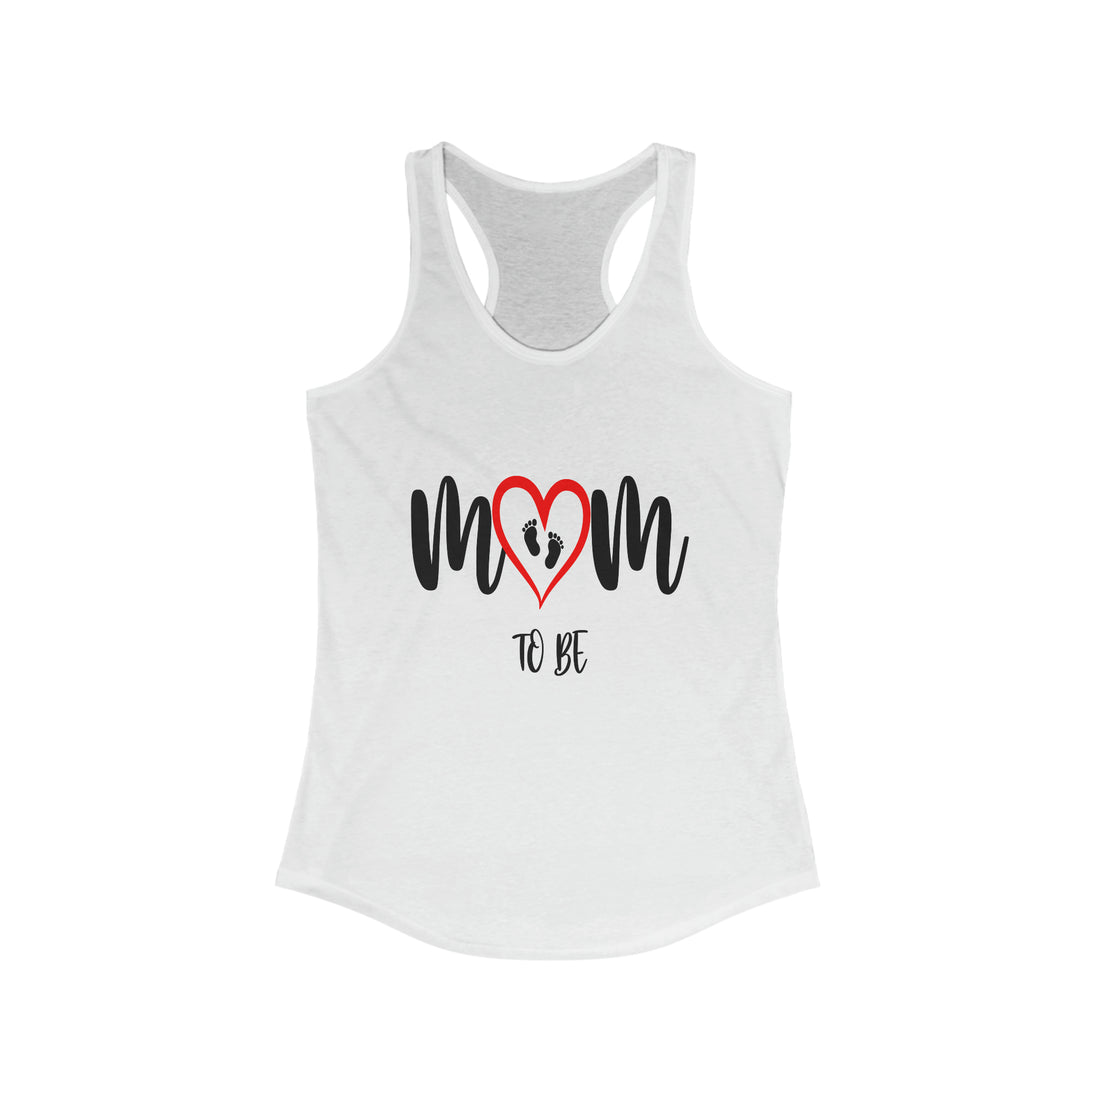 Mom To Be - Racerback Tank Top